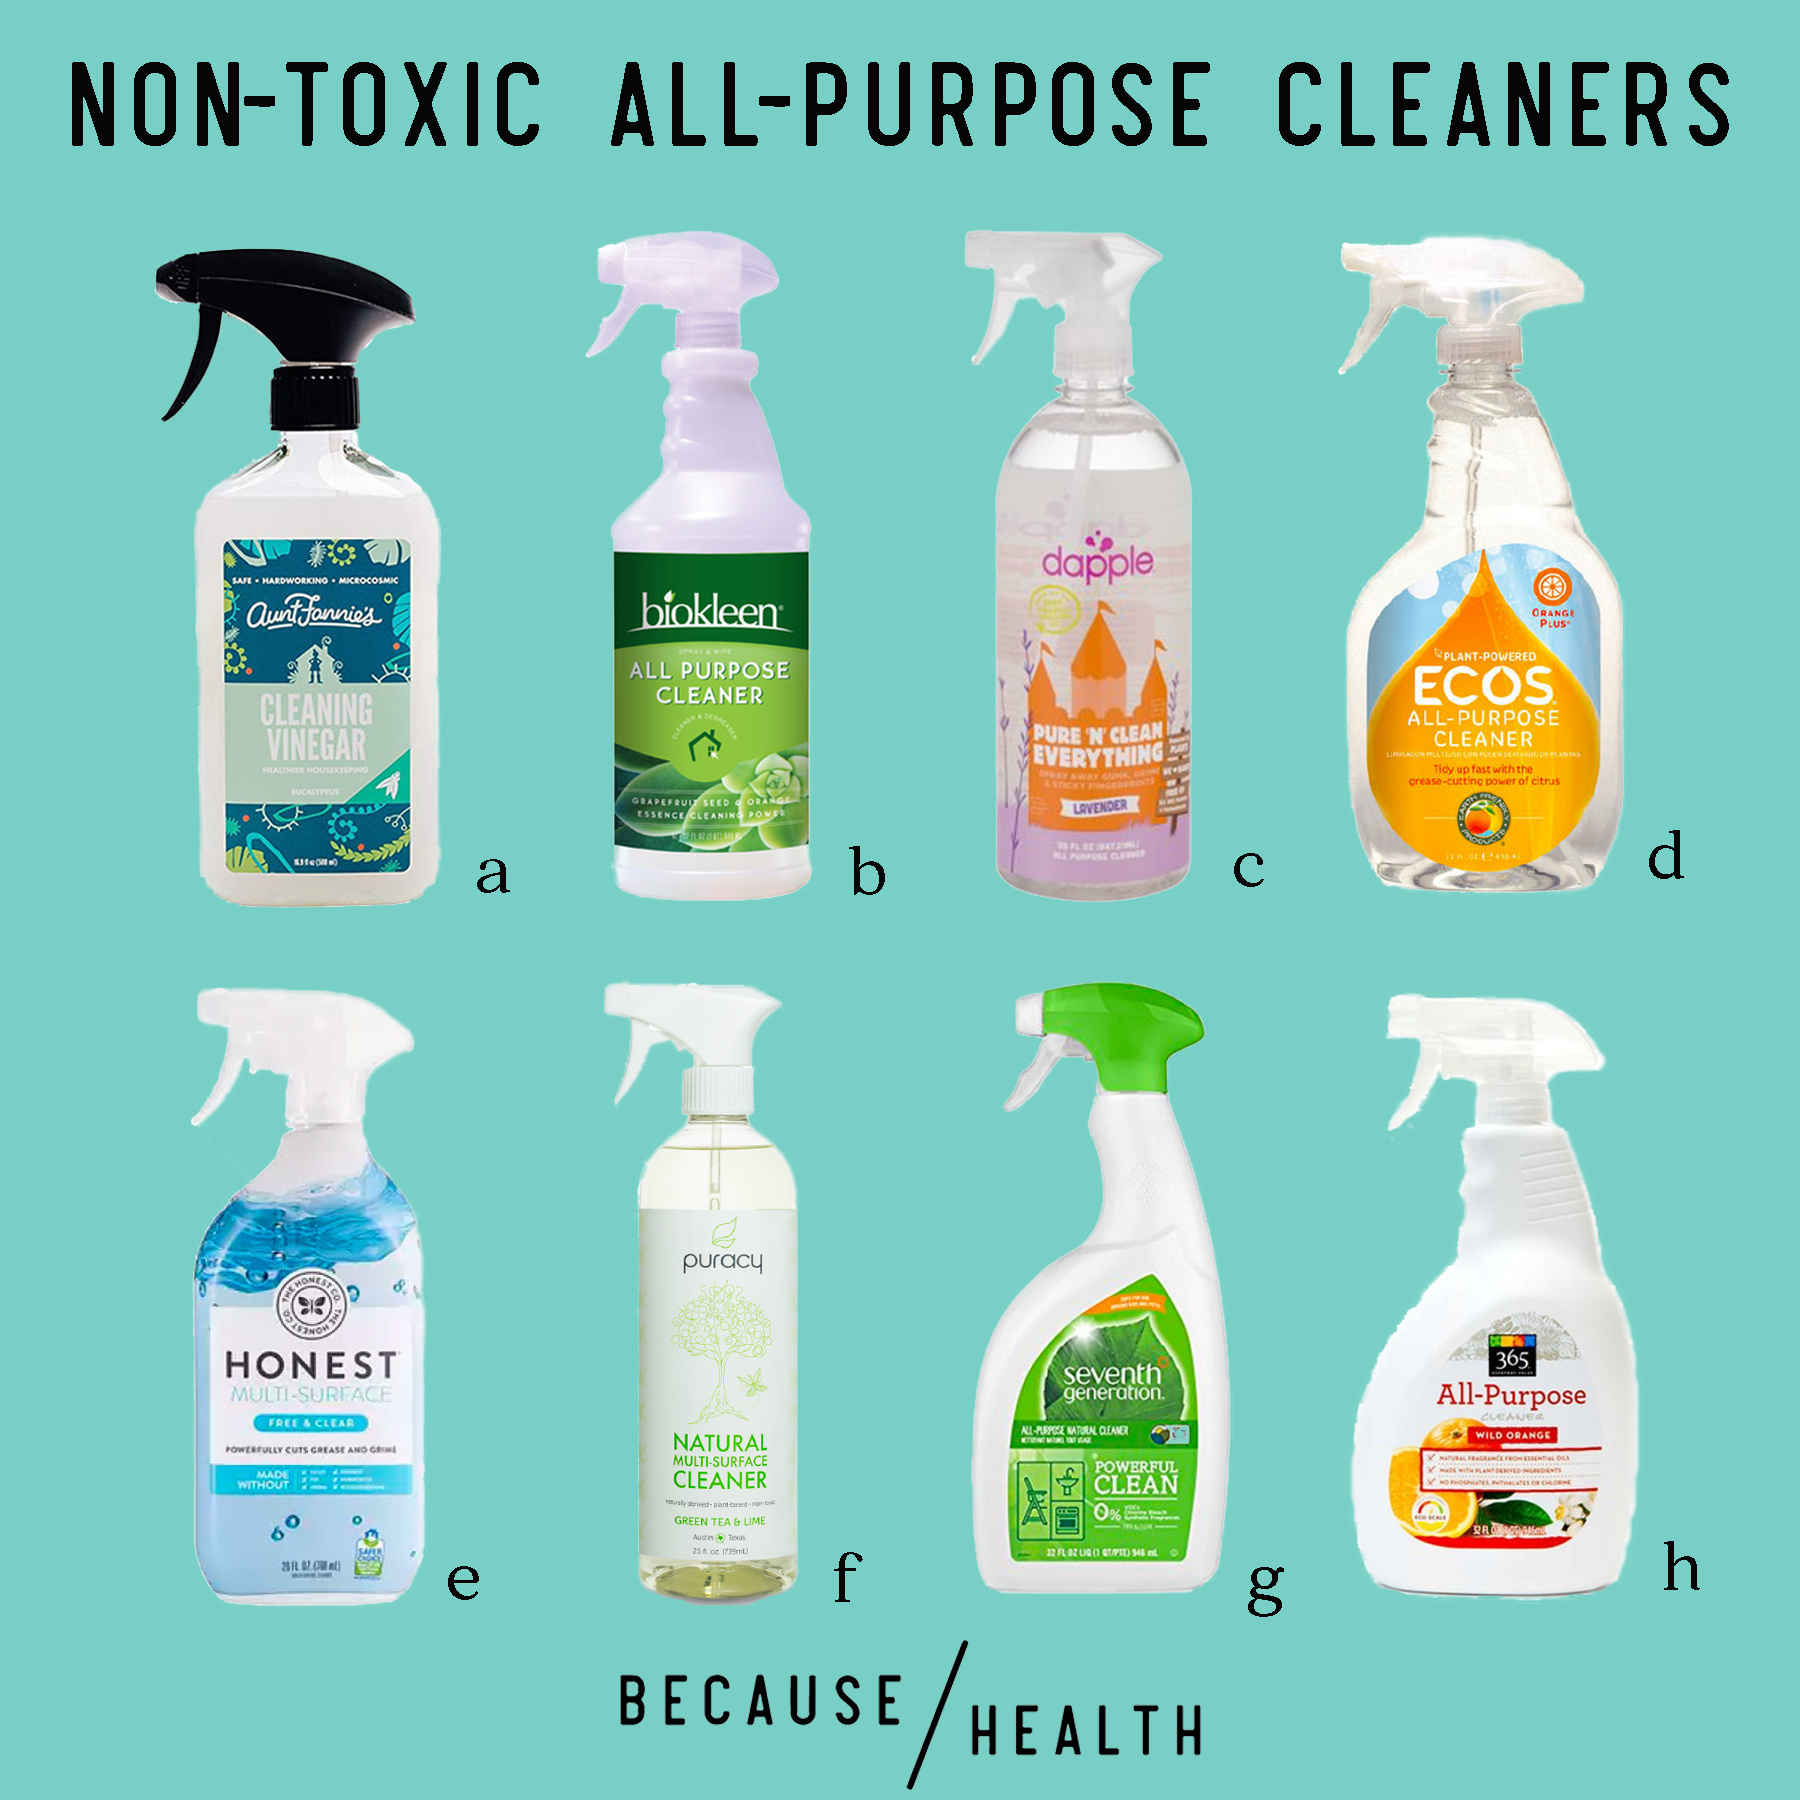 8 Hidden Toxins Lurking in Your Cleaning Products